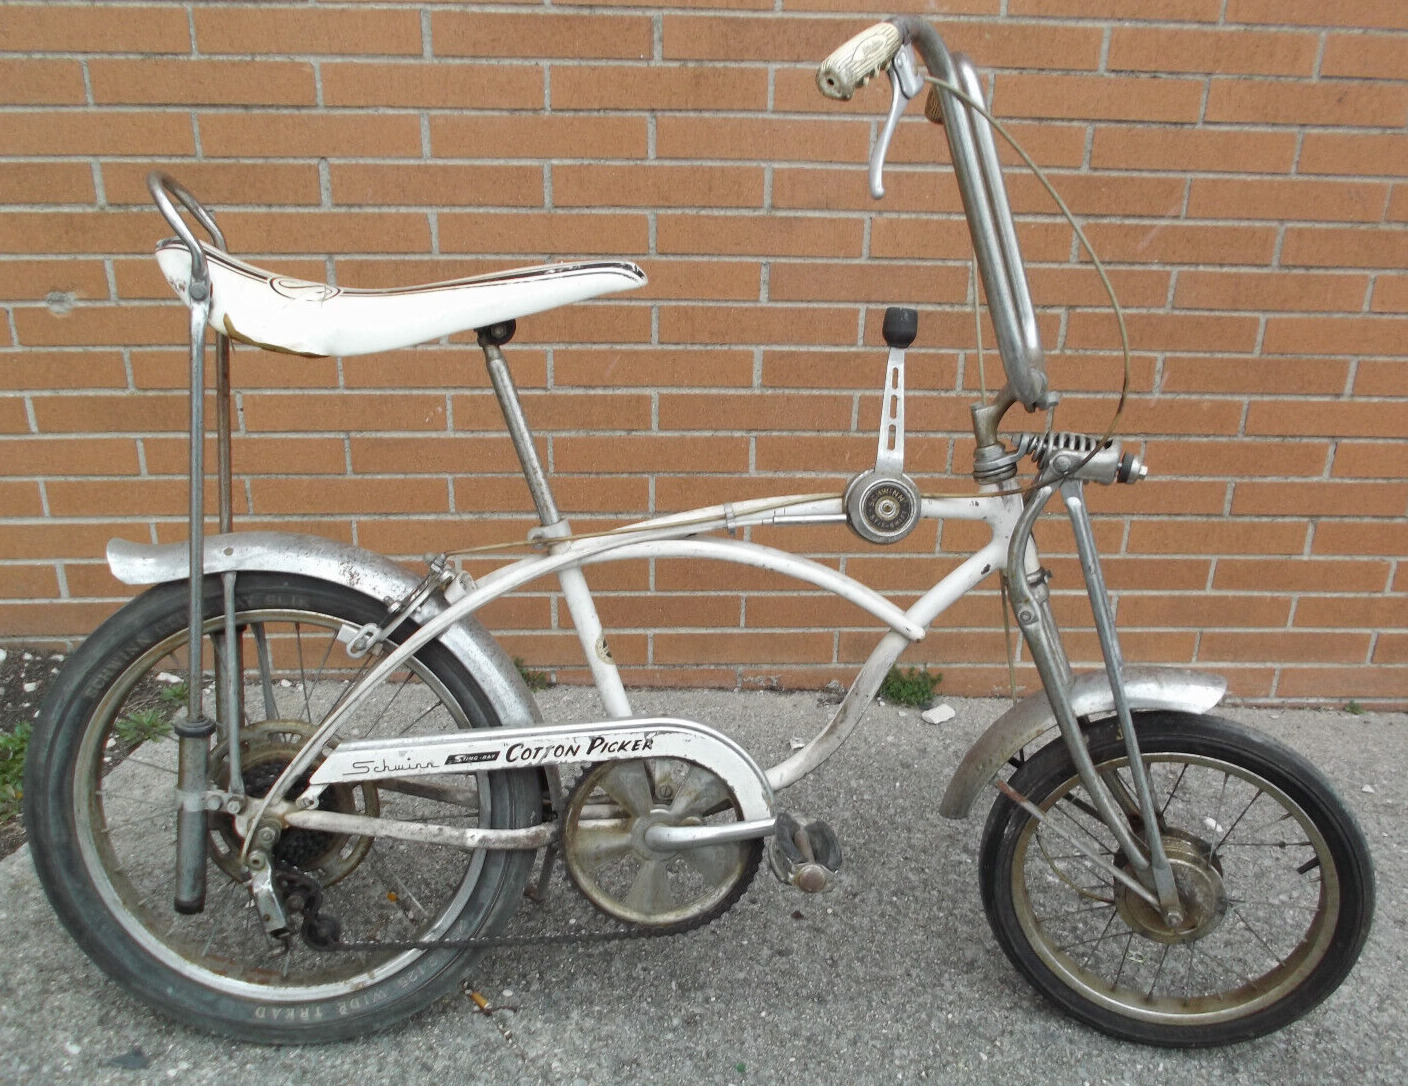 Nov 1969 LE 1970 Schwinn Cotton Picker complete un-touched for 30 years Krate